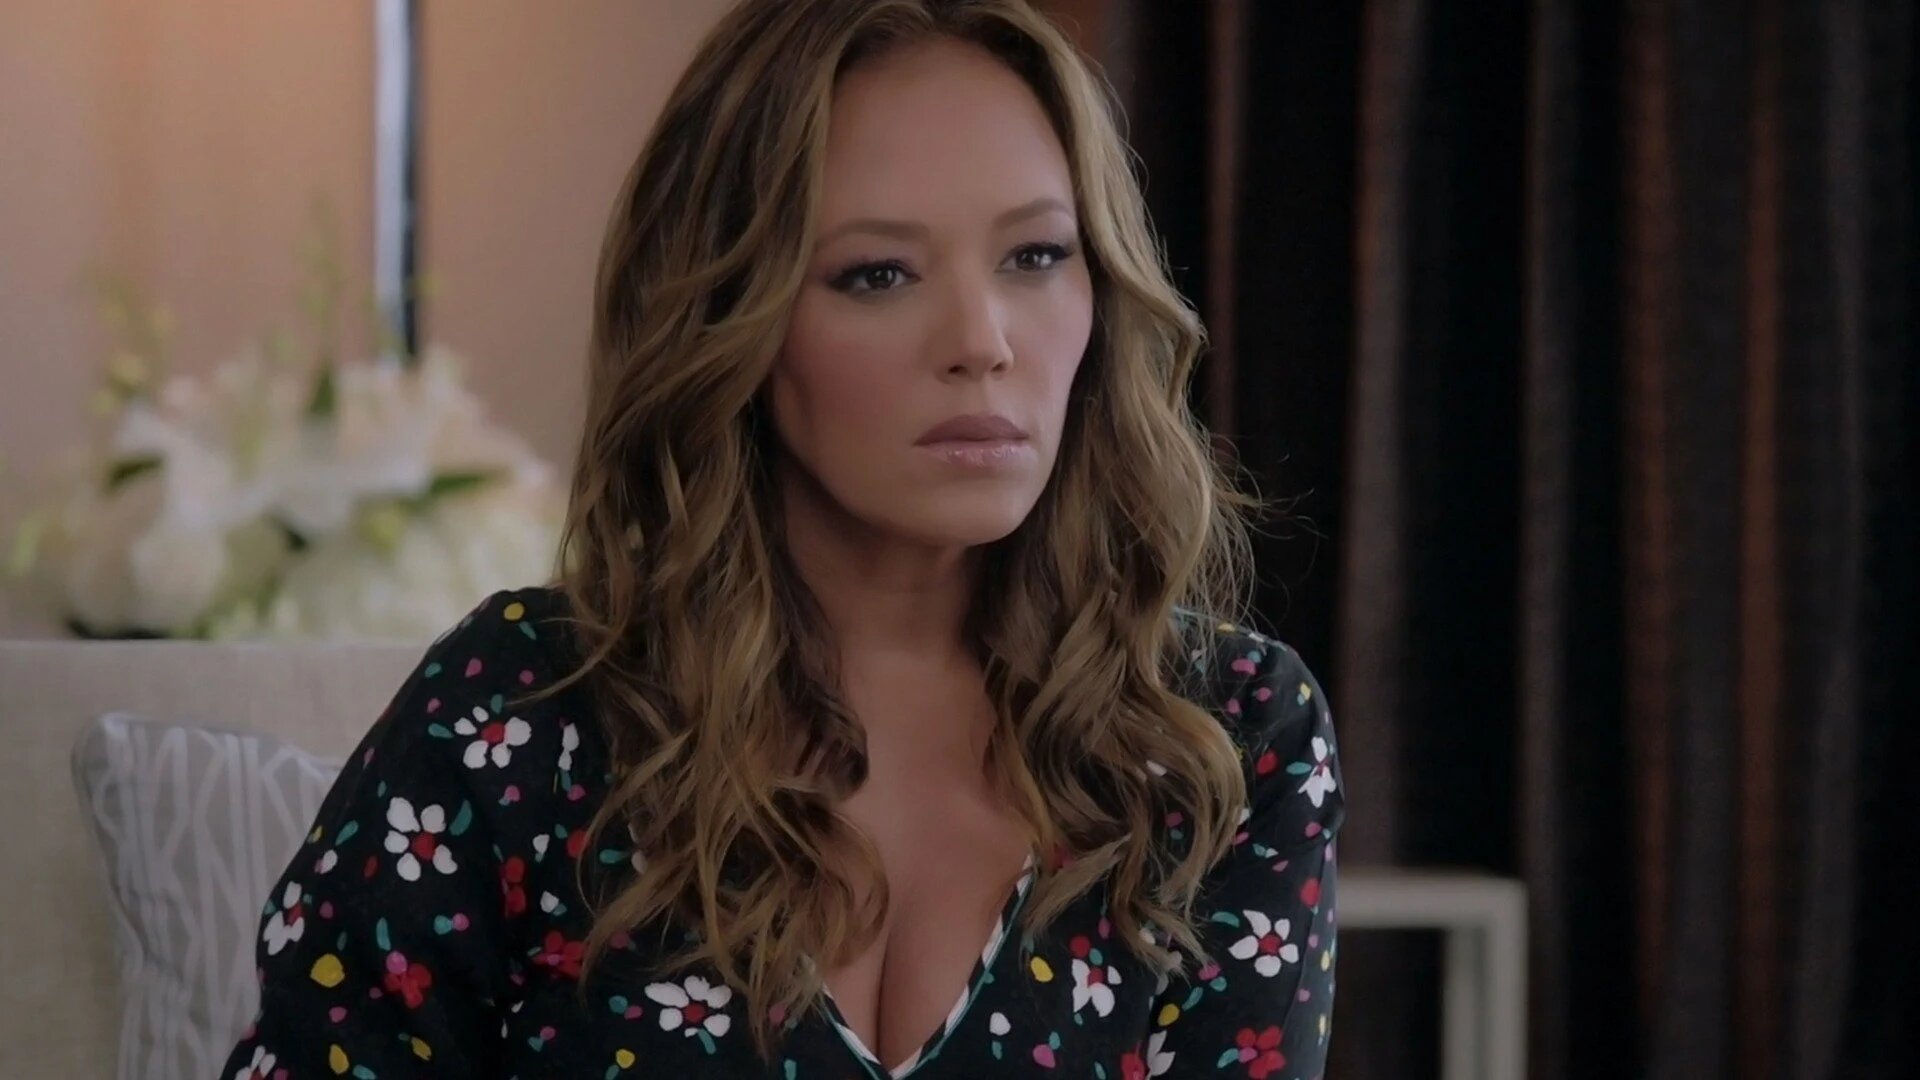 Leah Remini: Scientology and the Aftermath S2E7 The Ranches